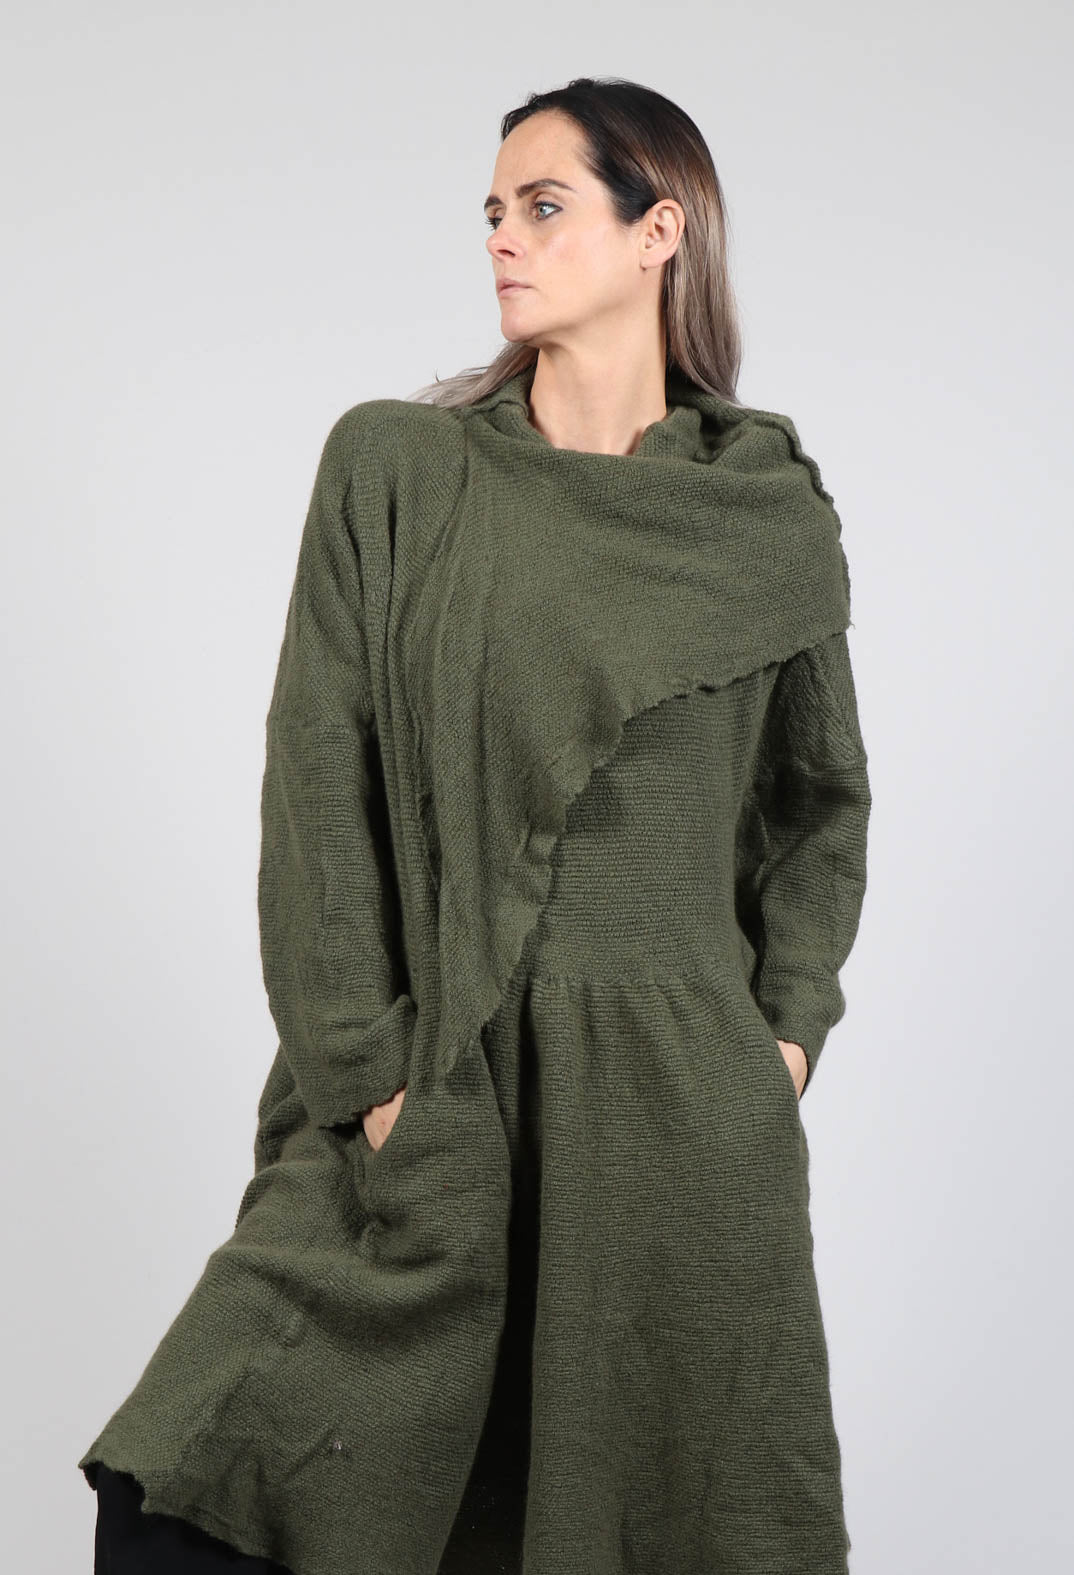 Jumper Dress with Ascot Neck Detail in Olive